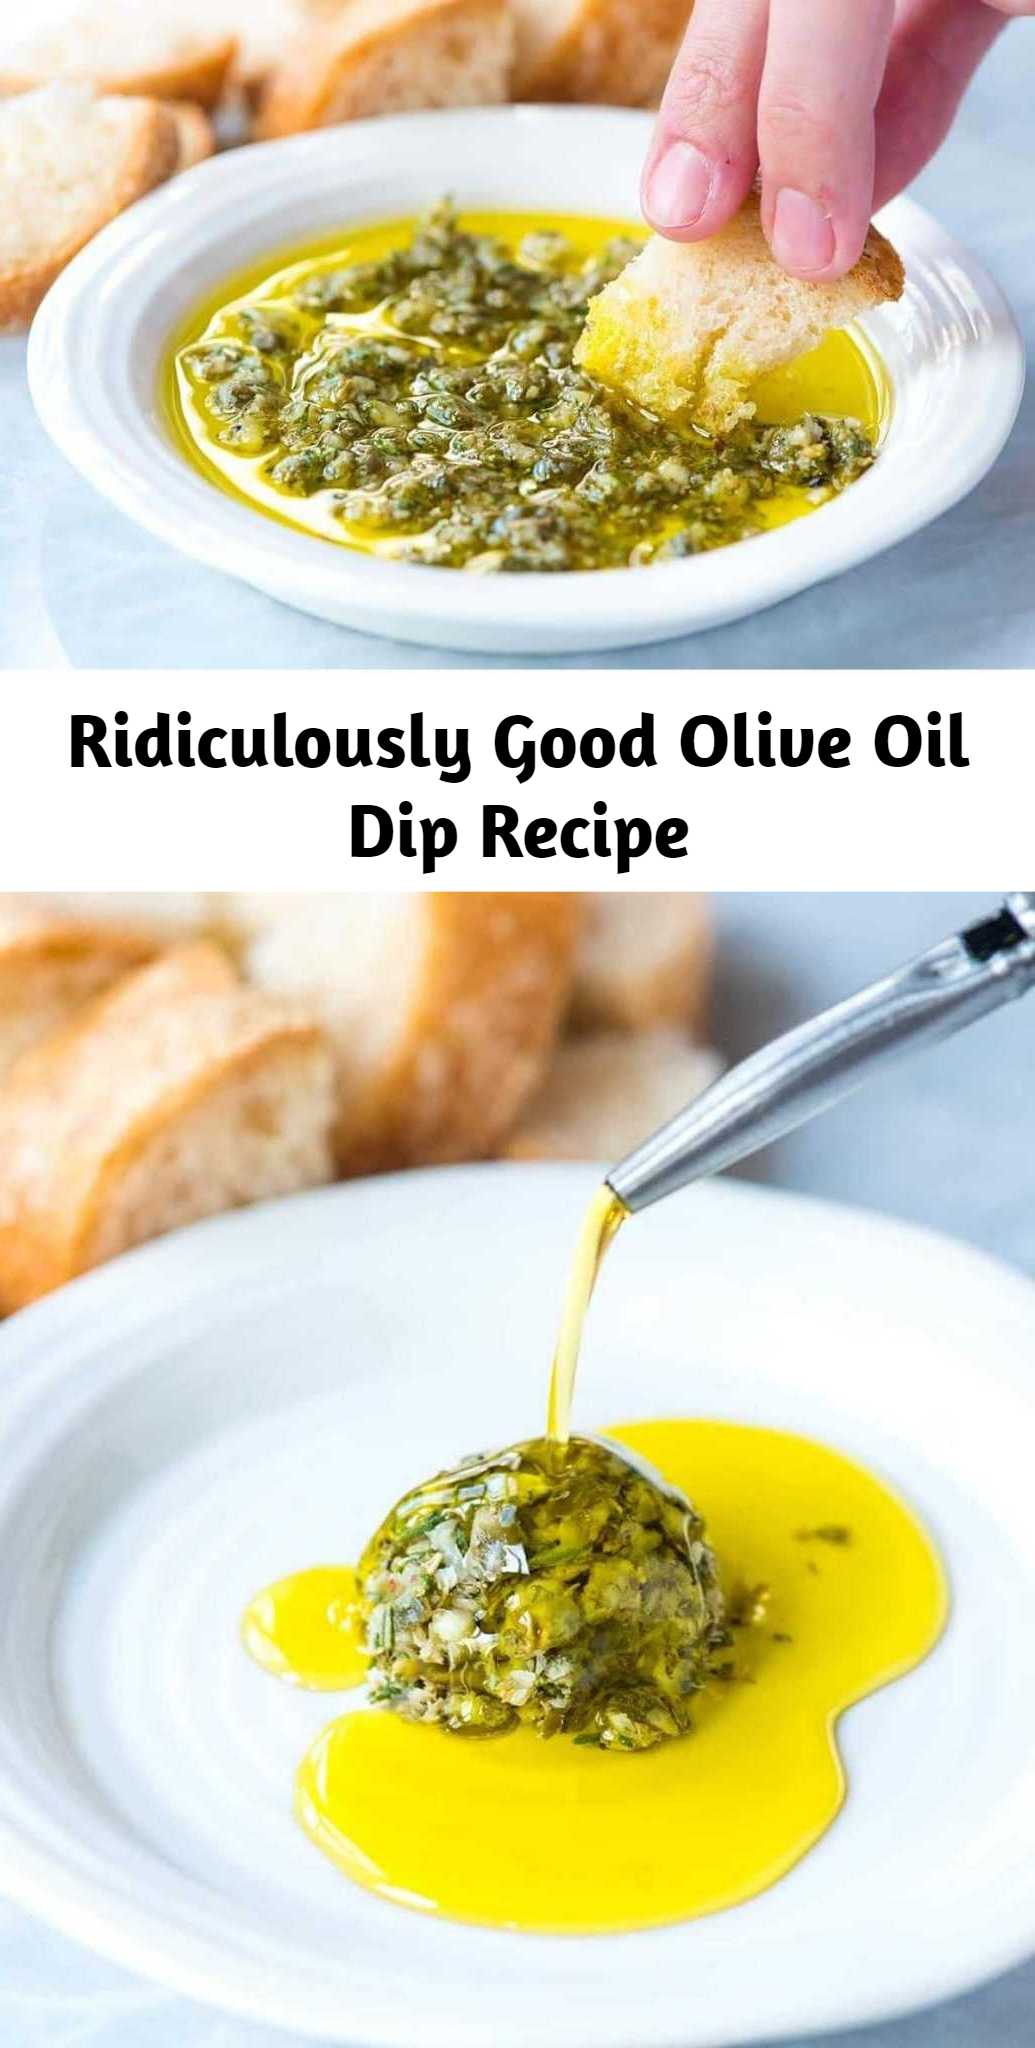 Ridiculously Good Olive Oil Dip Recipe - This garlic and herb mixture is a flavor bomb. When topped with olive oil, it turns into a delicious dip for bread. Keep extra olive oil close by, you can always top up the plate with more. #appetizer #dip